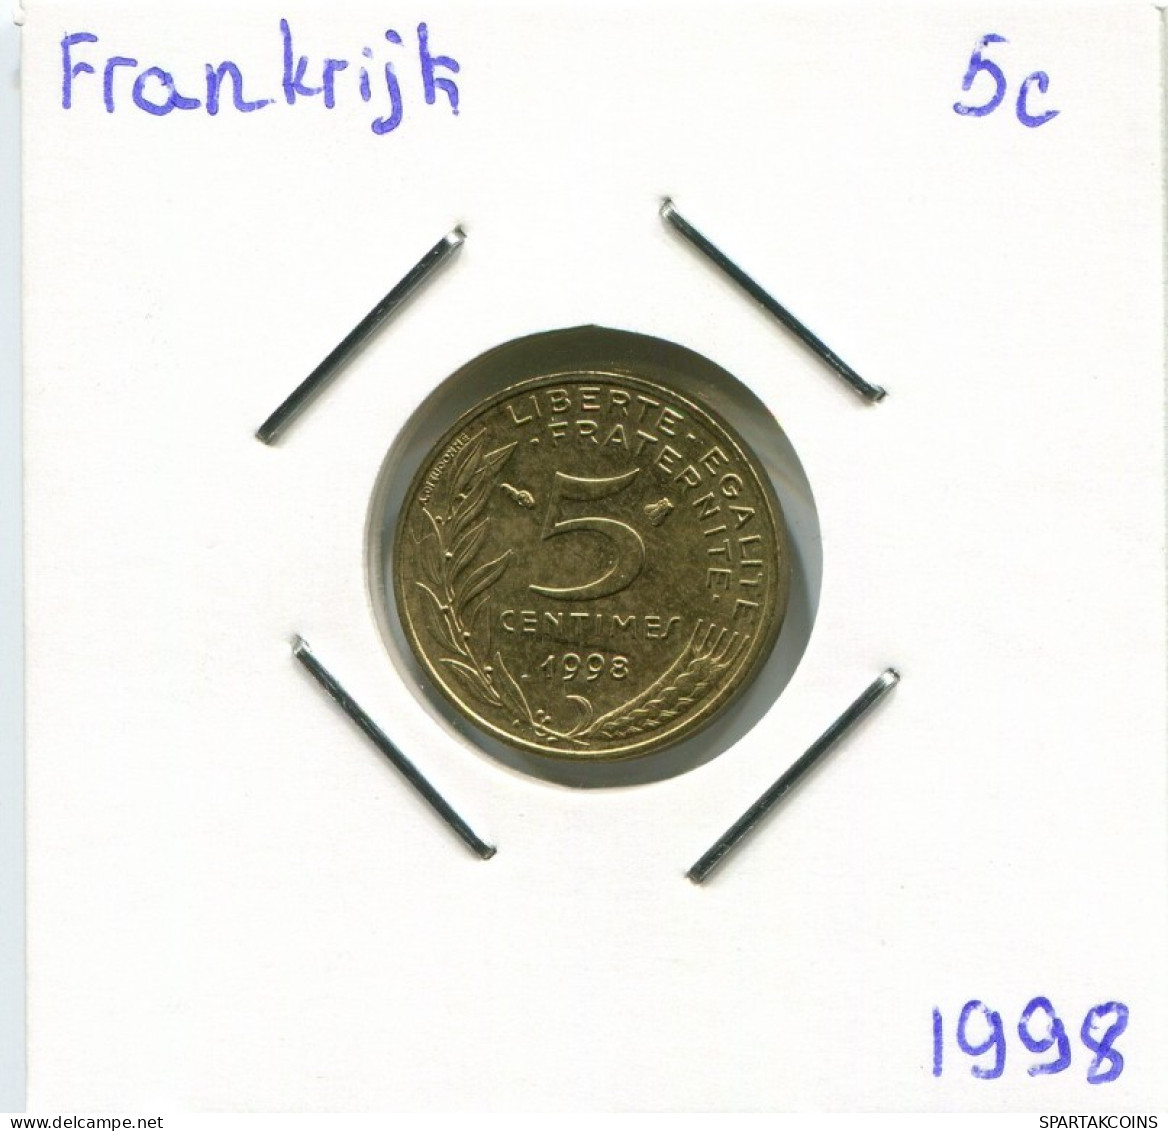 5 CENTIMES 1998 FRANCE Coin French Coin #AM770.U.A - 5 Centimes